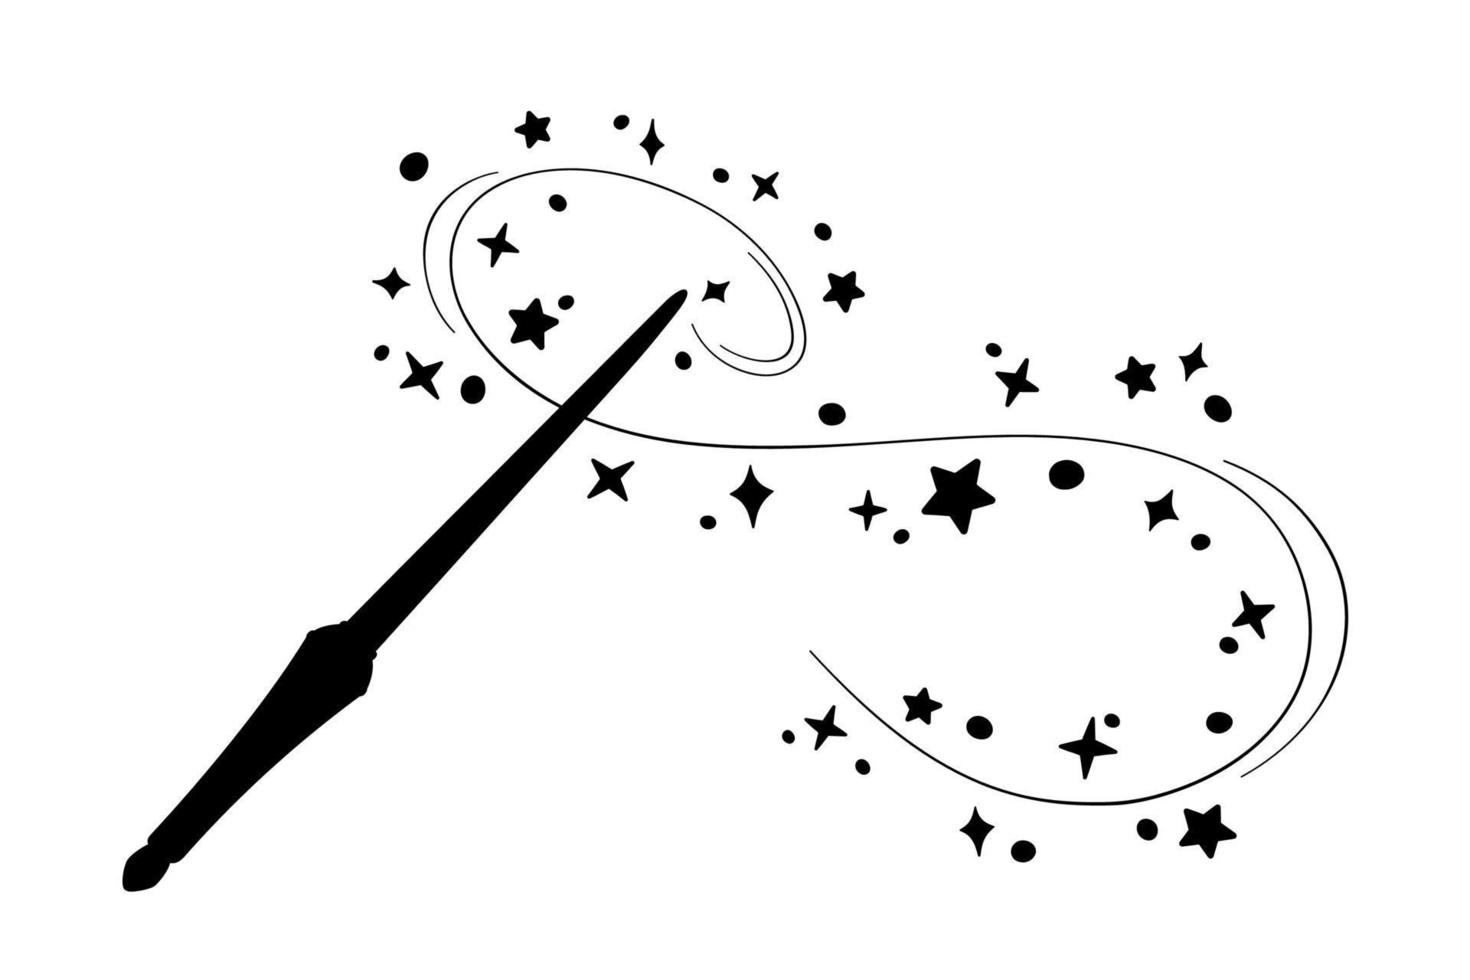 https://static.vecteezy.com/system/resources/previews/019/861/731/non_2x/magic-wand-silhouette-in-simple-style-illustration-shiny-stick-icon-for-print-and-design-hand-drawn-isolated-elements-on-white-background-magician-cast-spell-fairy-stars-and-sparkles-vector.jpg